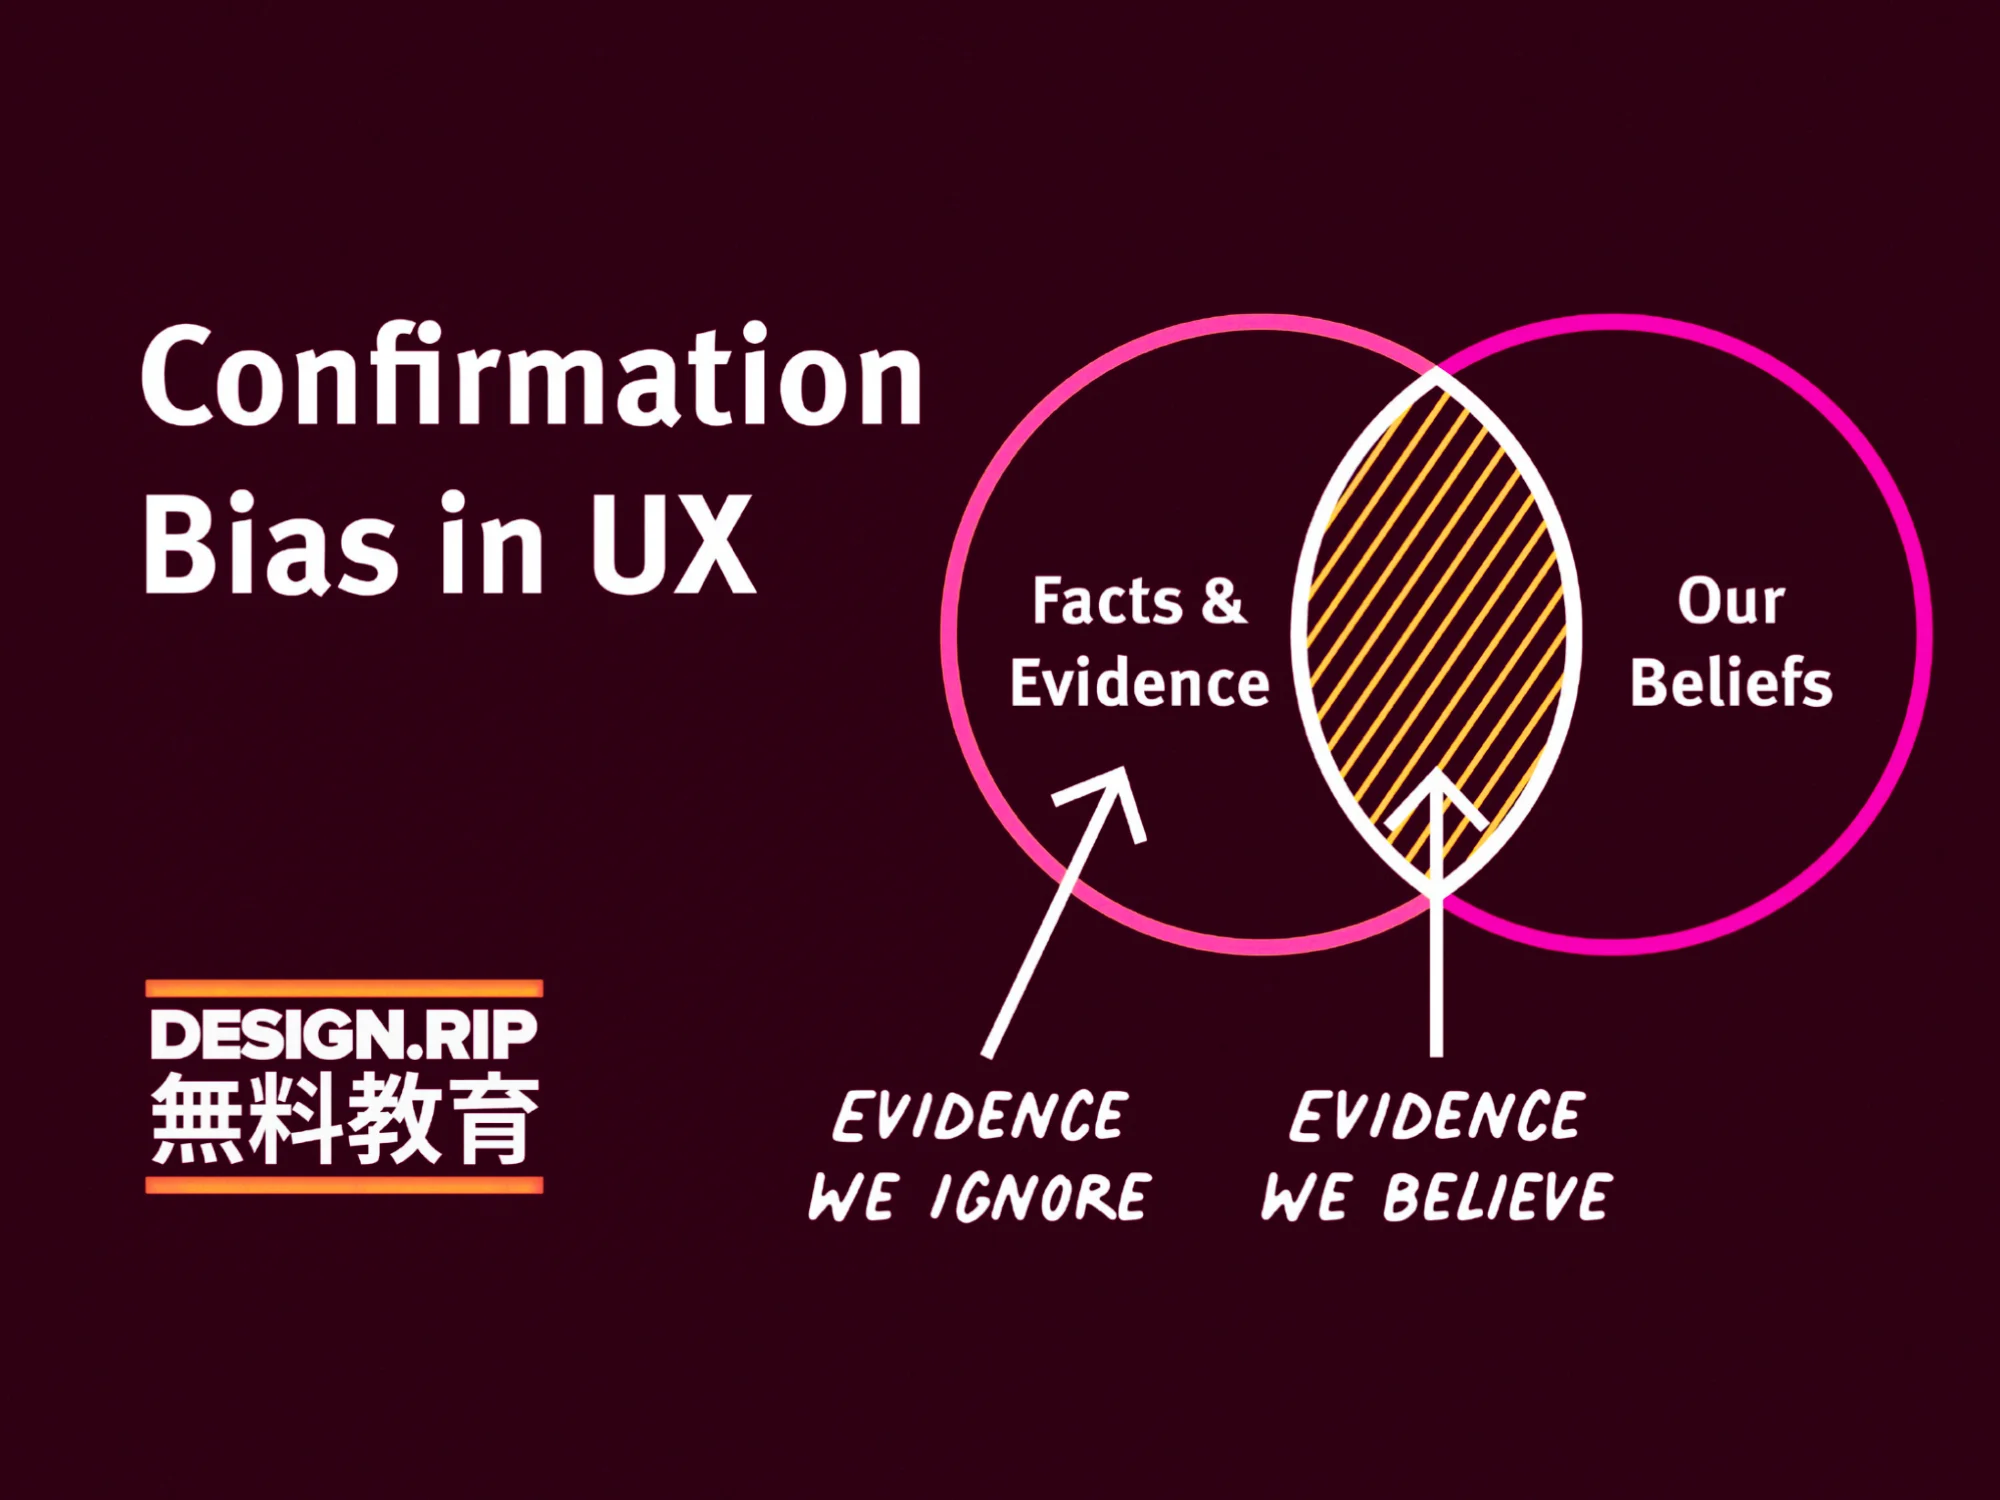 Confirmation Bias in UX